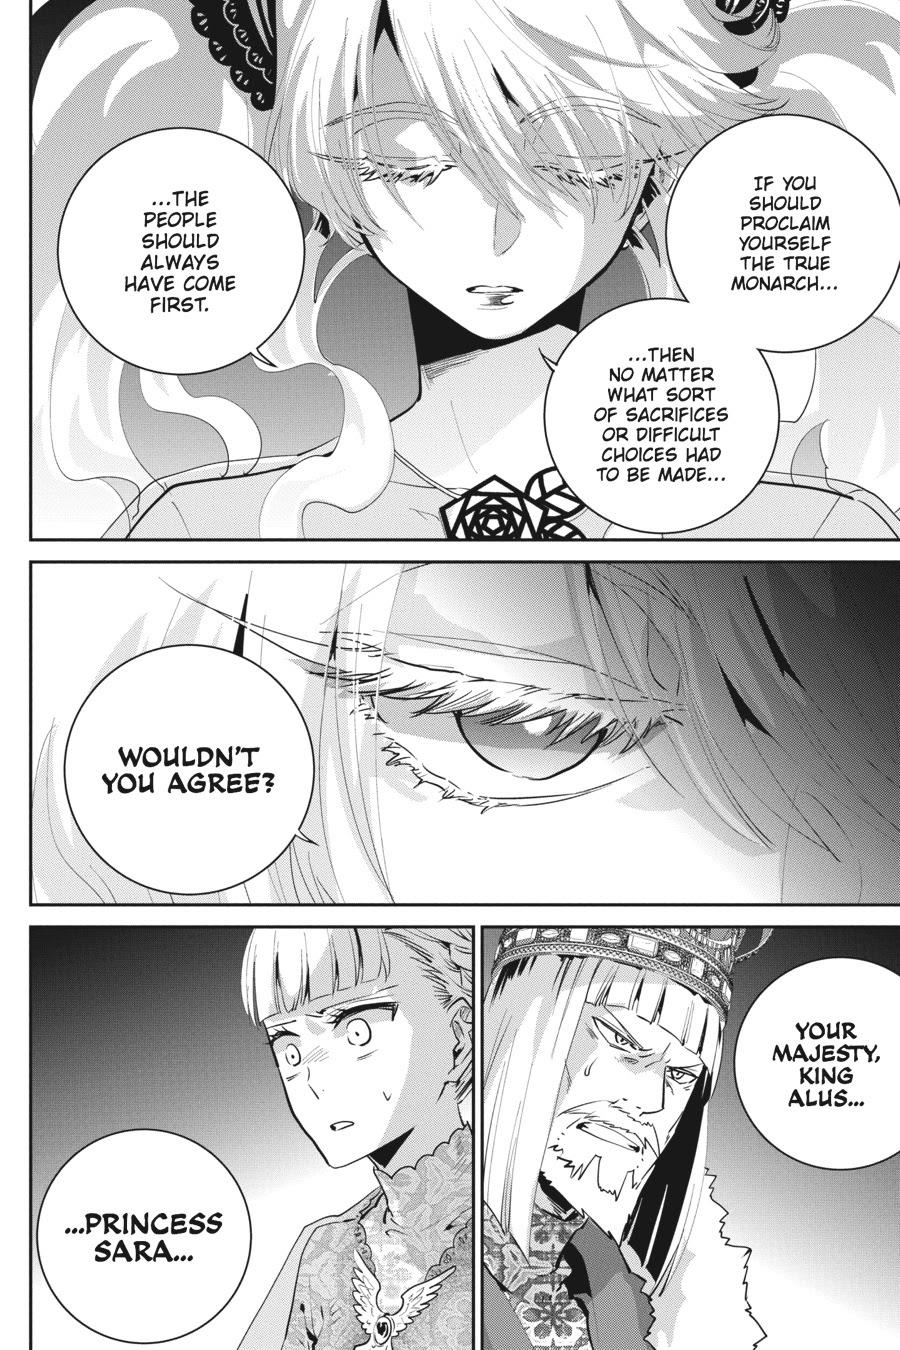 Final Fantasy Lost Stranger Chapter 15 Read Final Fantasy Lost Stranger Chapter 15 Online At Allmanga Us Page 3